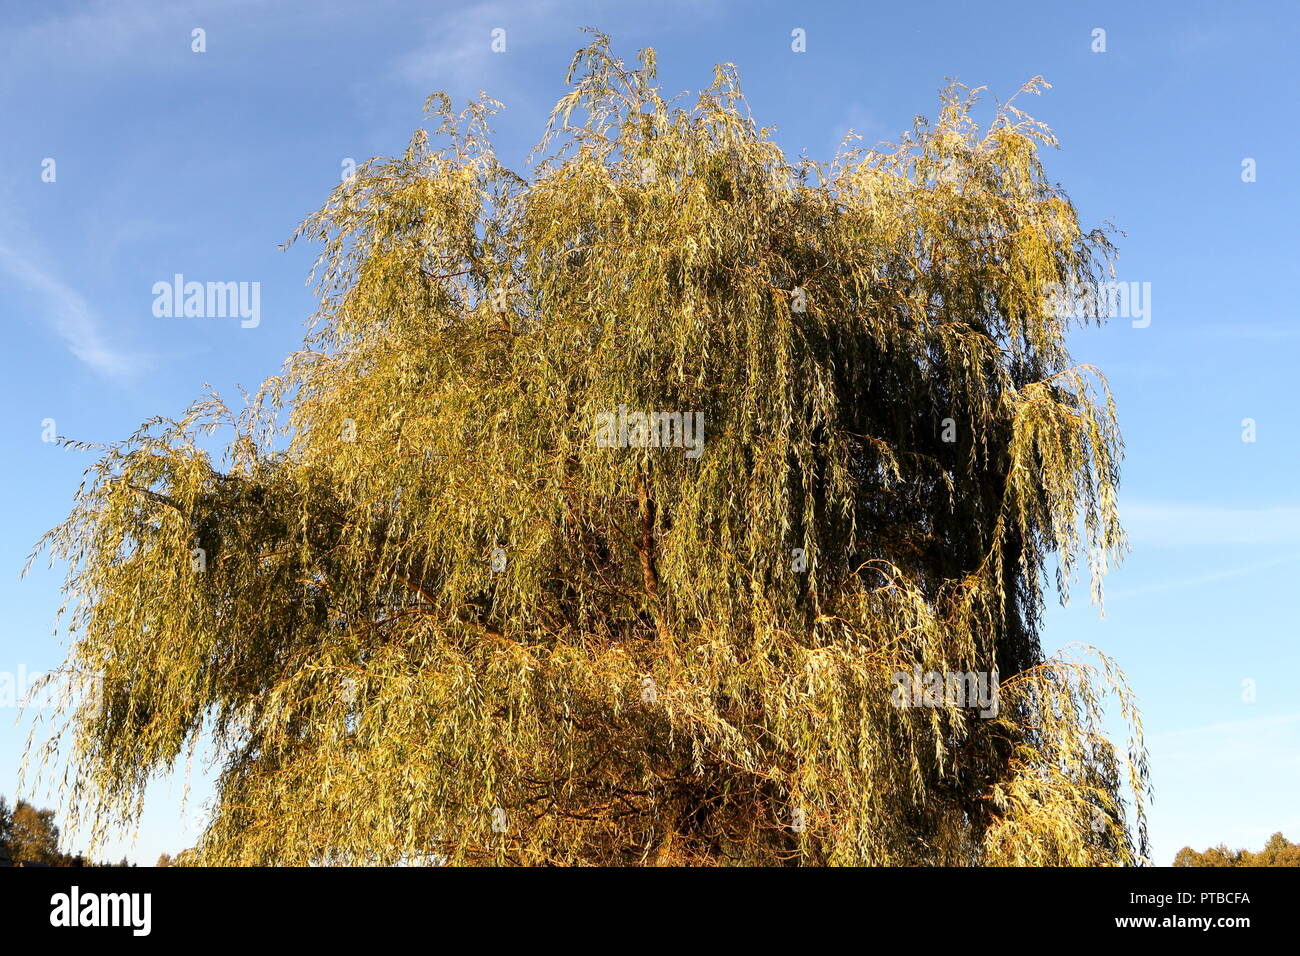 Weeping willow on blue sky background in early autumn Stock Photo